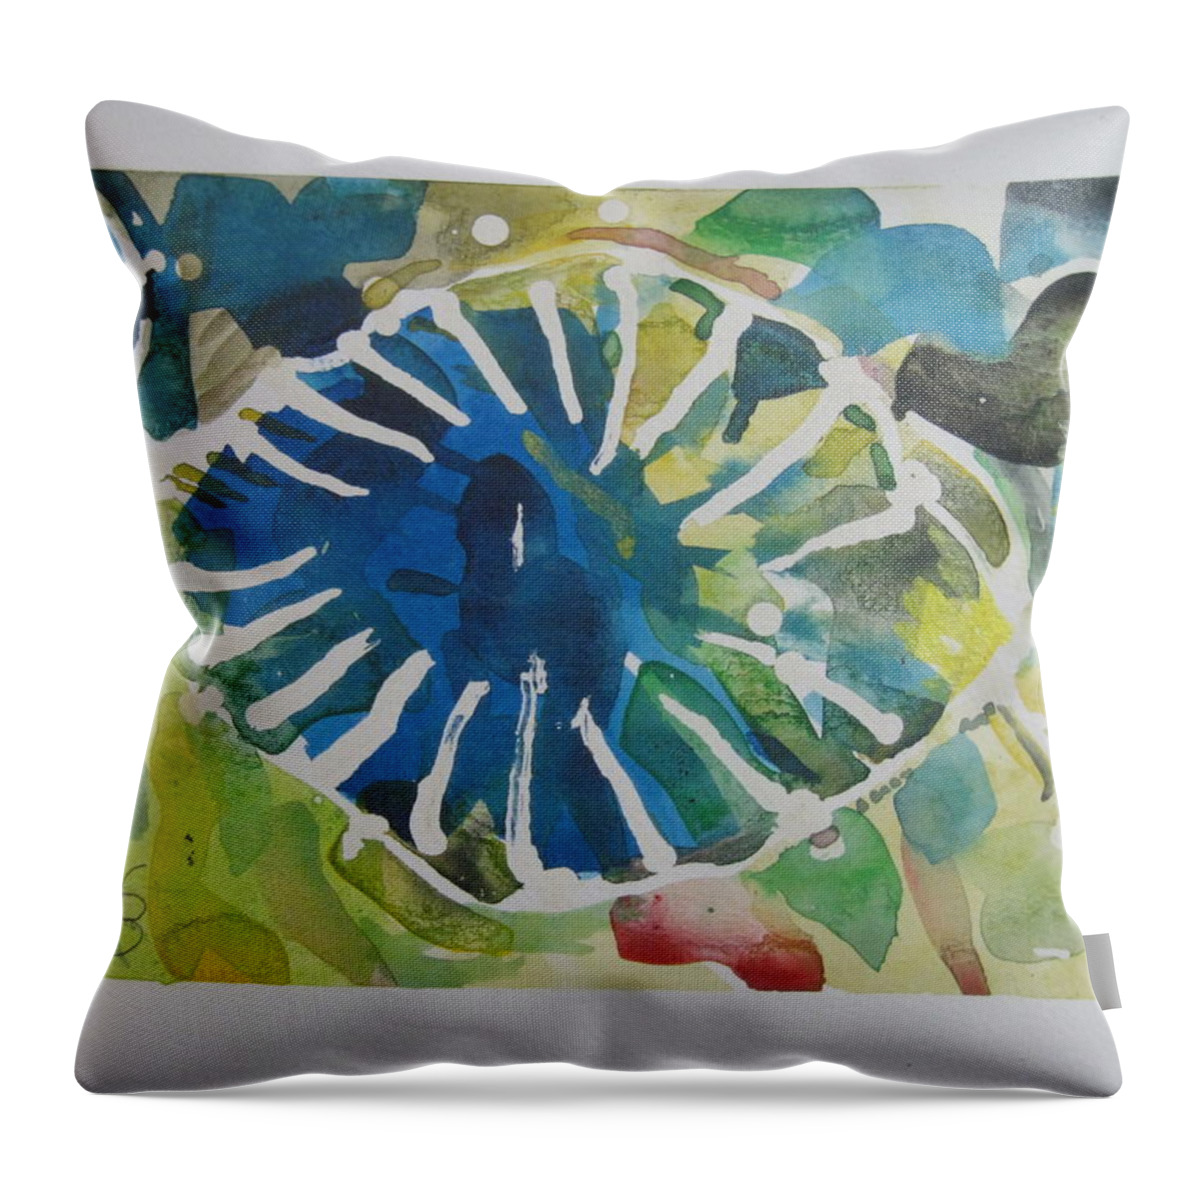  Throw Pillow featuring the drawing 102-1217 by AJ Brown